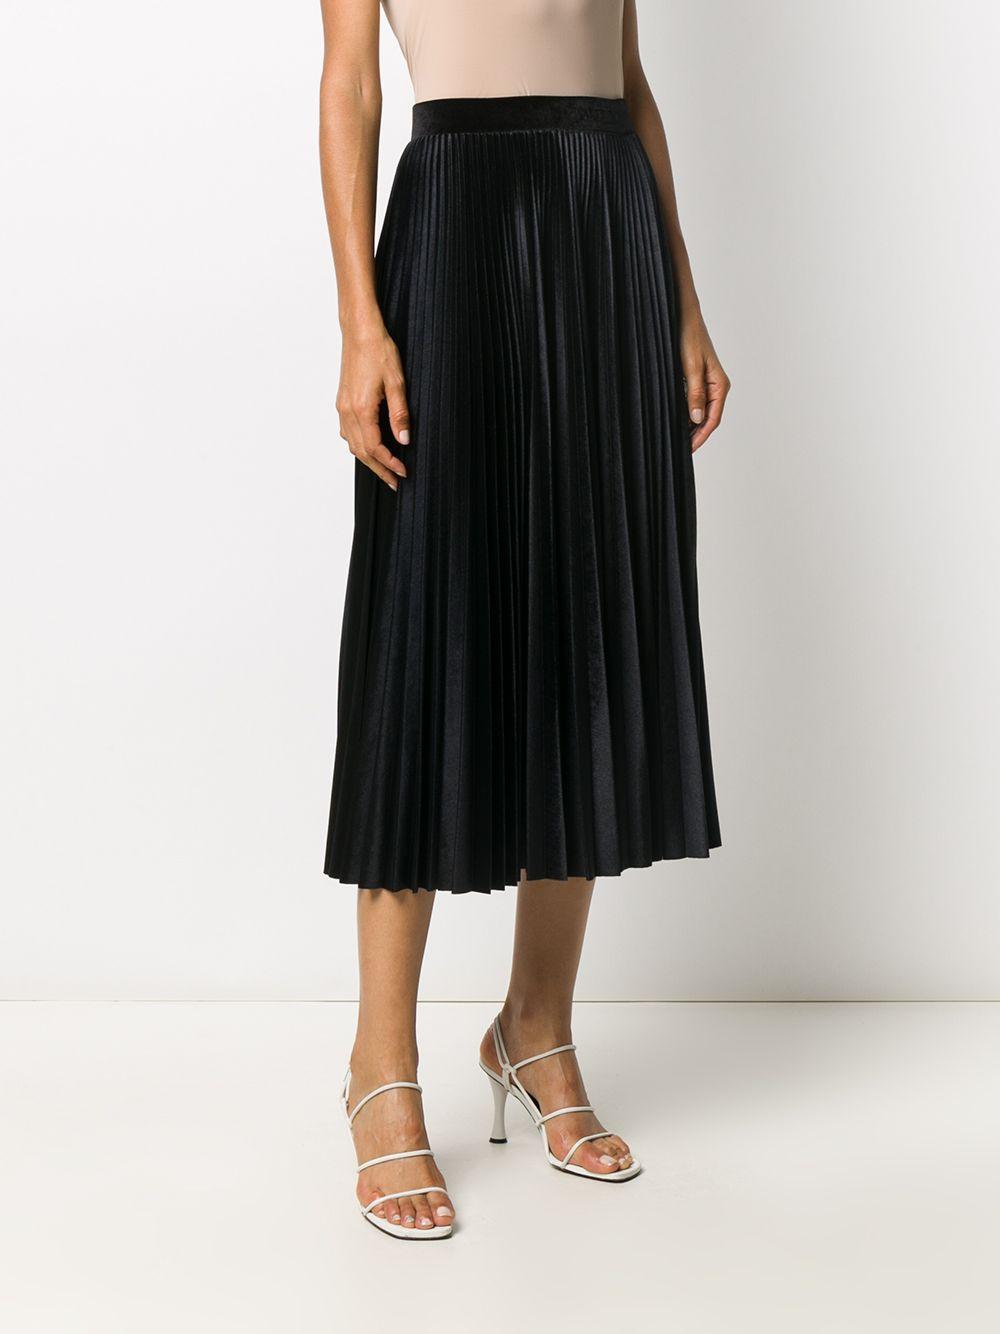 Valentino Synthetic Pleated Midi Skirt in Black - Lyst